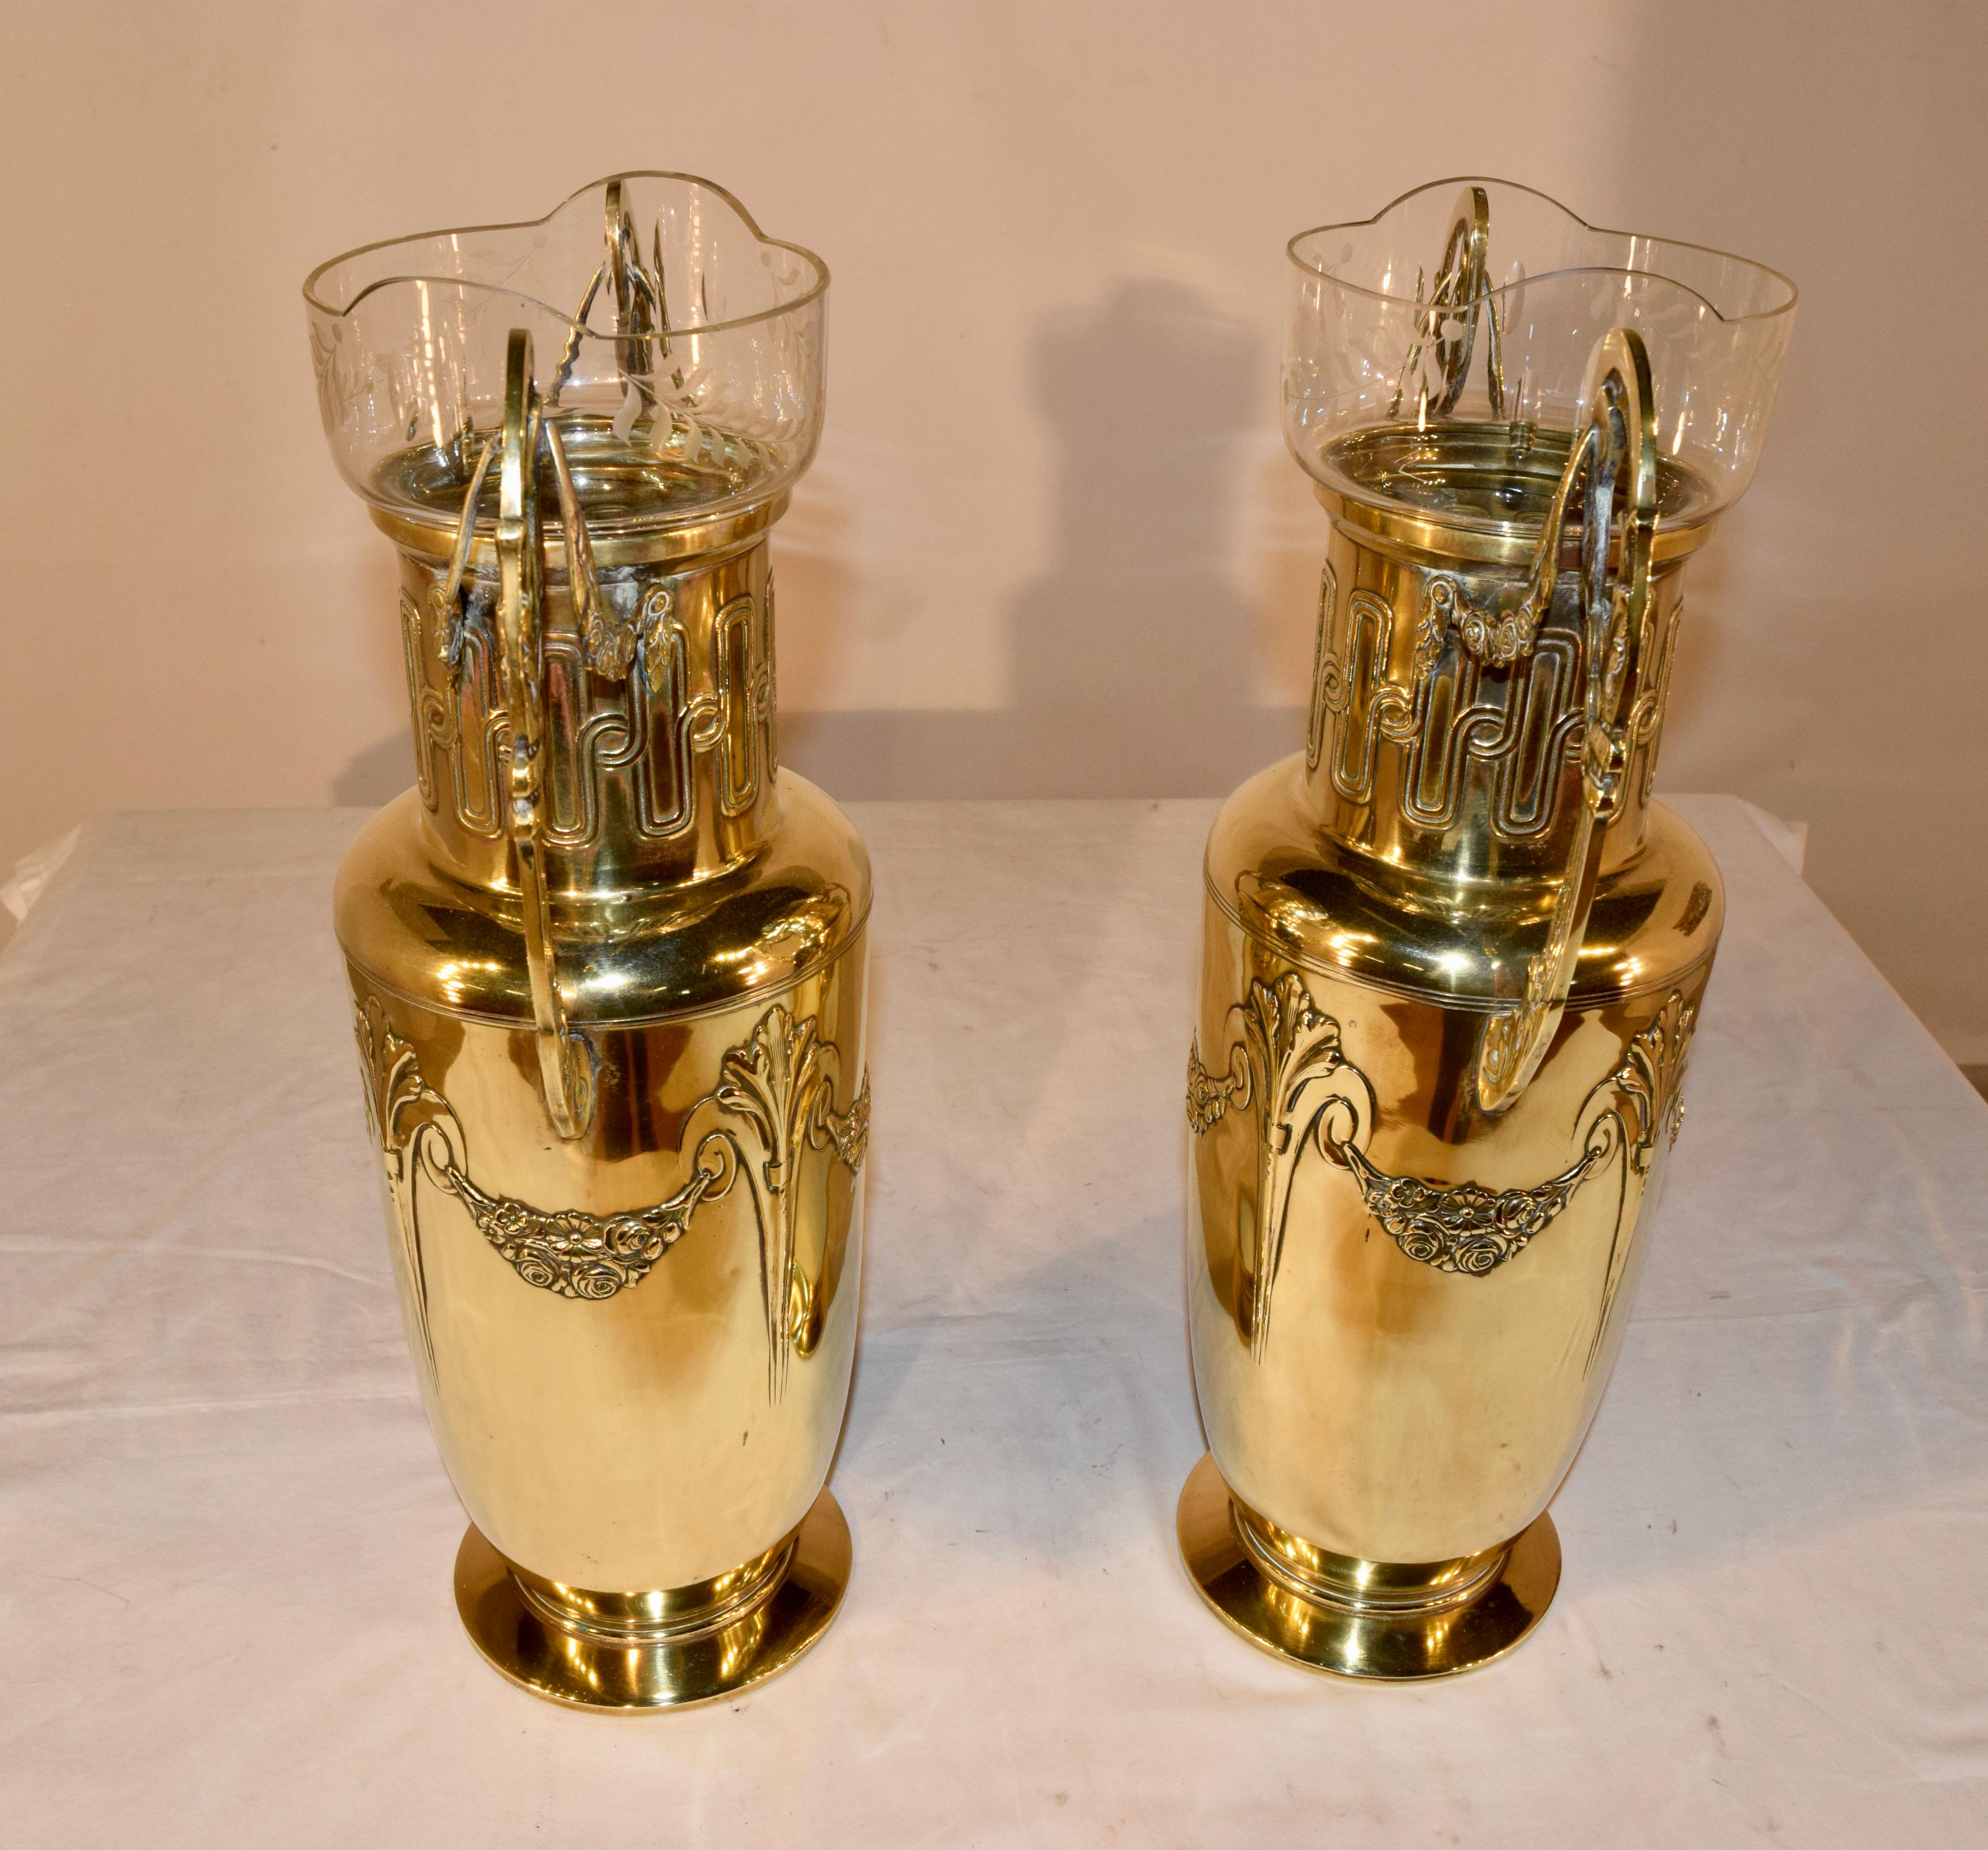 Pair of 19th Century Hand Cast Brass Vases with Glass Inserts For Sale 2